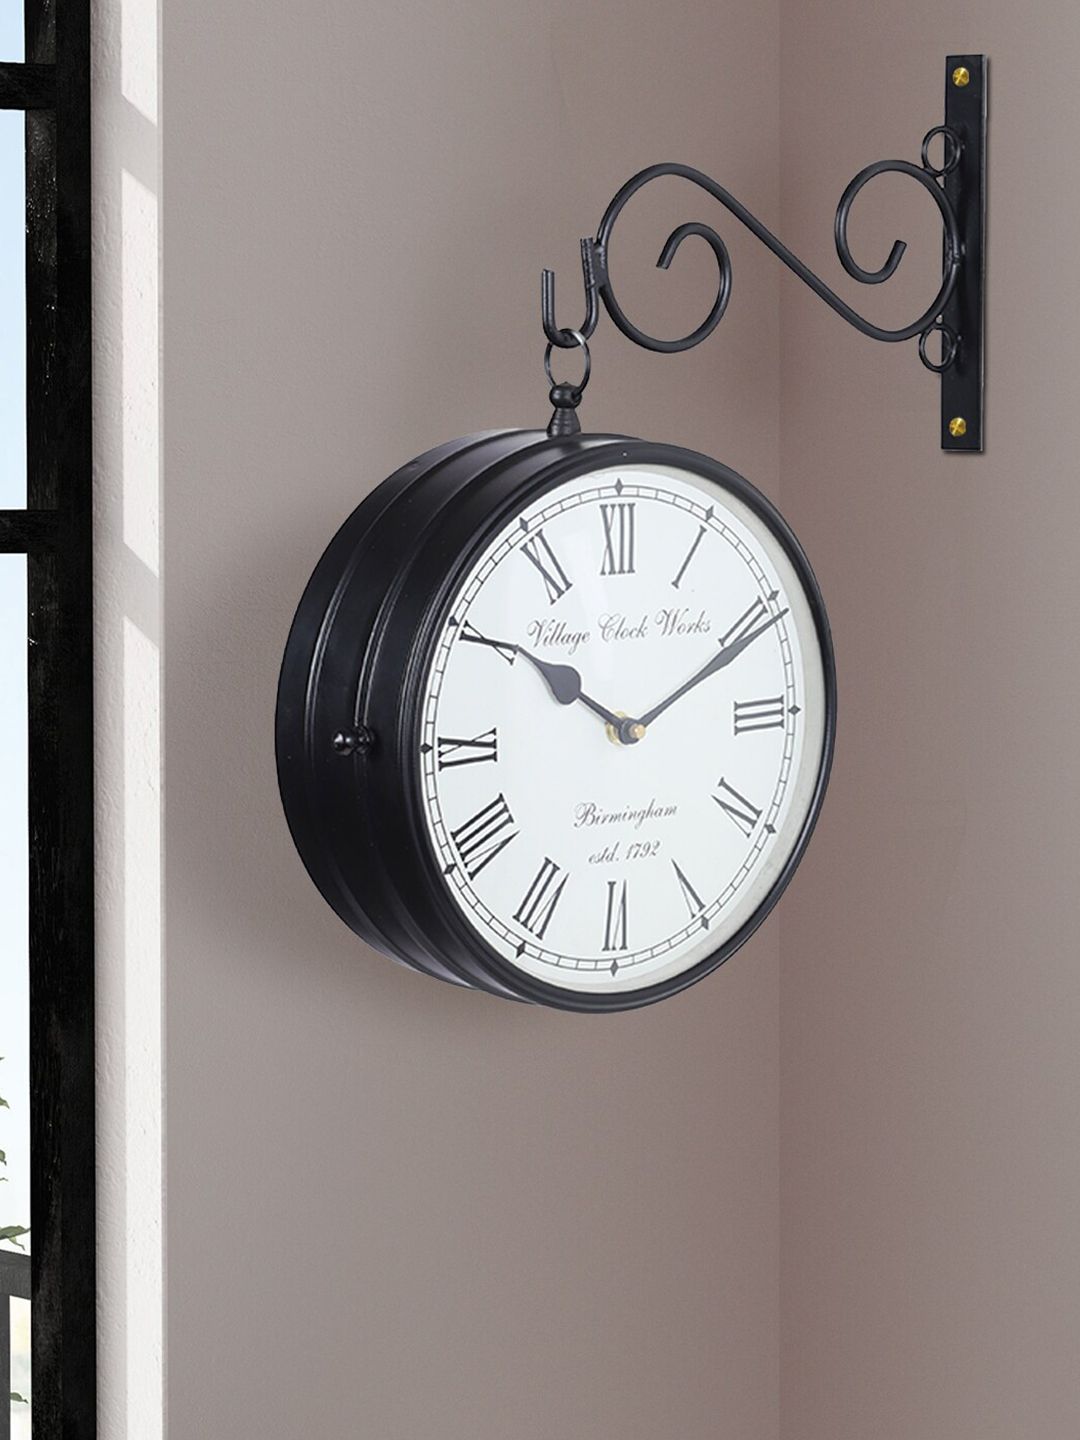 Aapno Rajasthan Black & White Railway Traditional Round Analogue Wall Clock Price in India